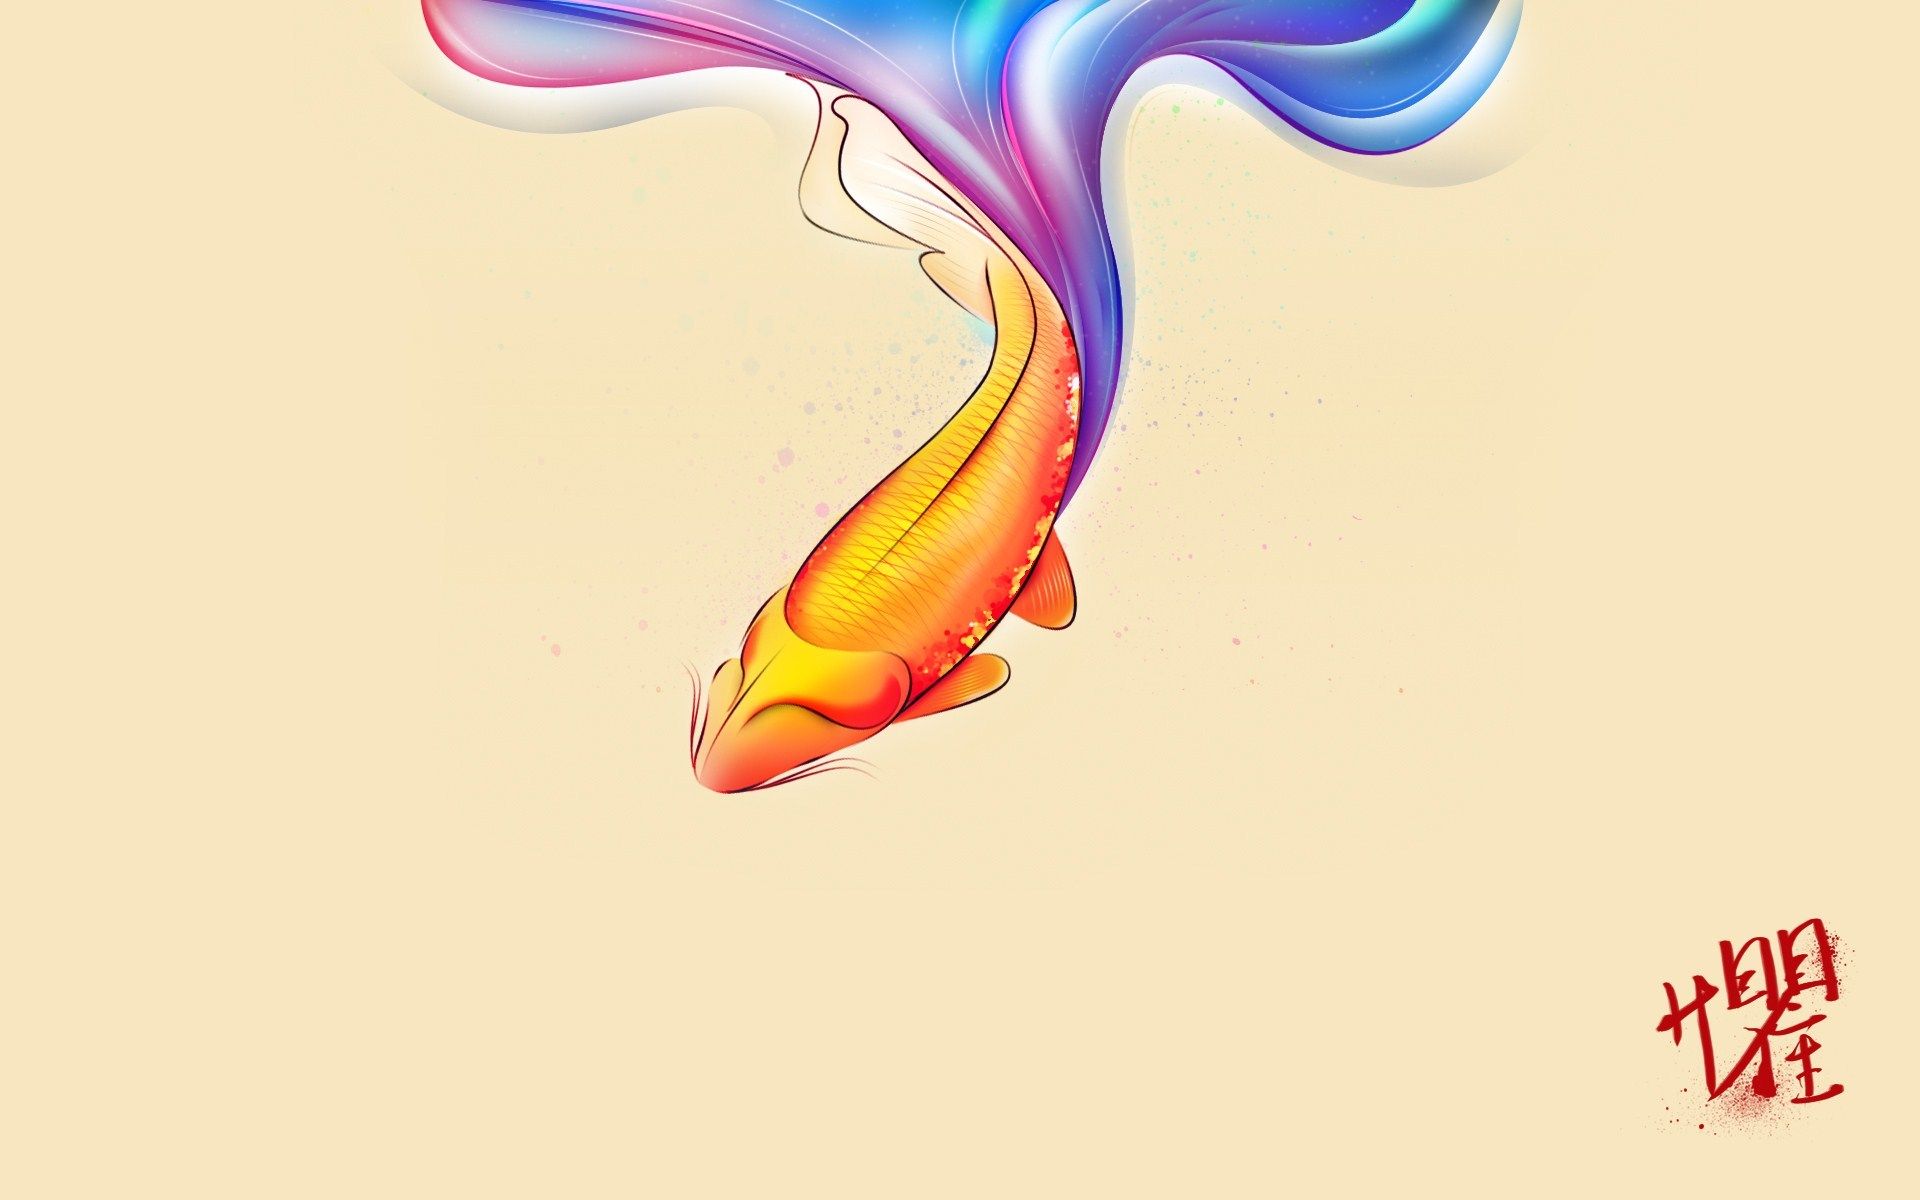 A colorful koi fish with a tail that looks like a rainbow. - Koi fish, fish